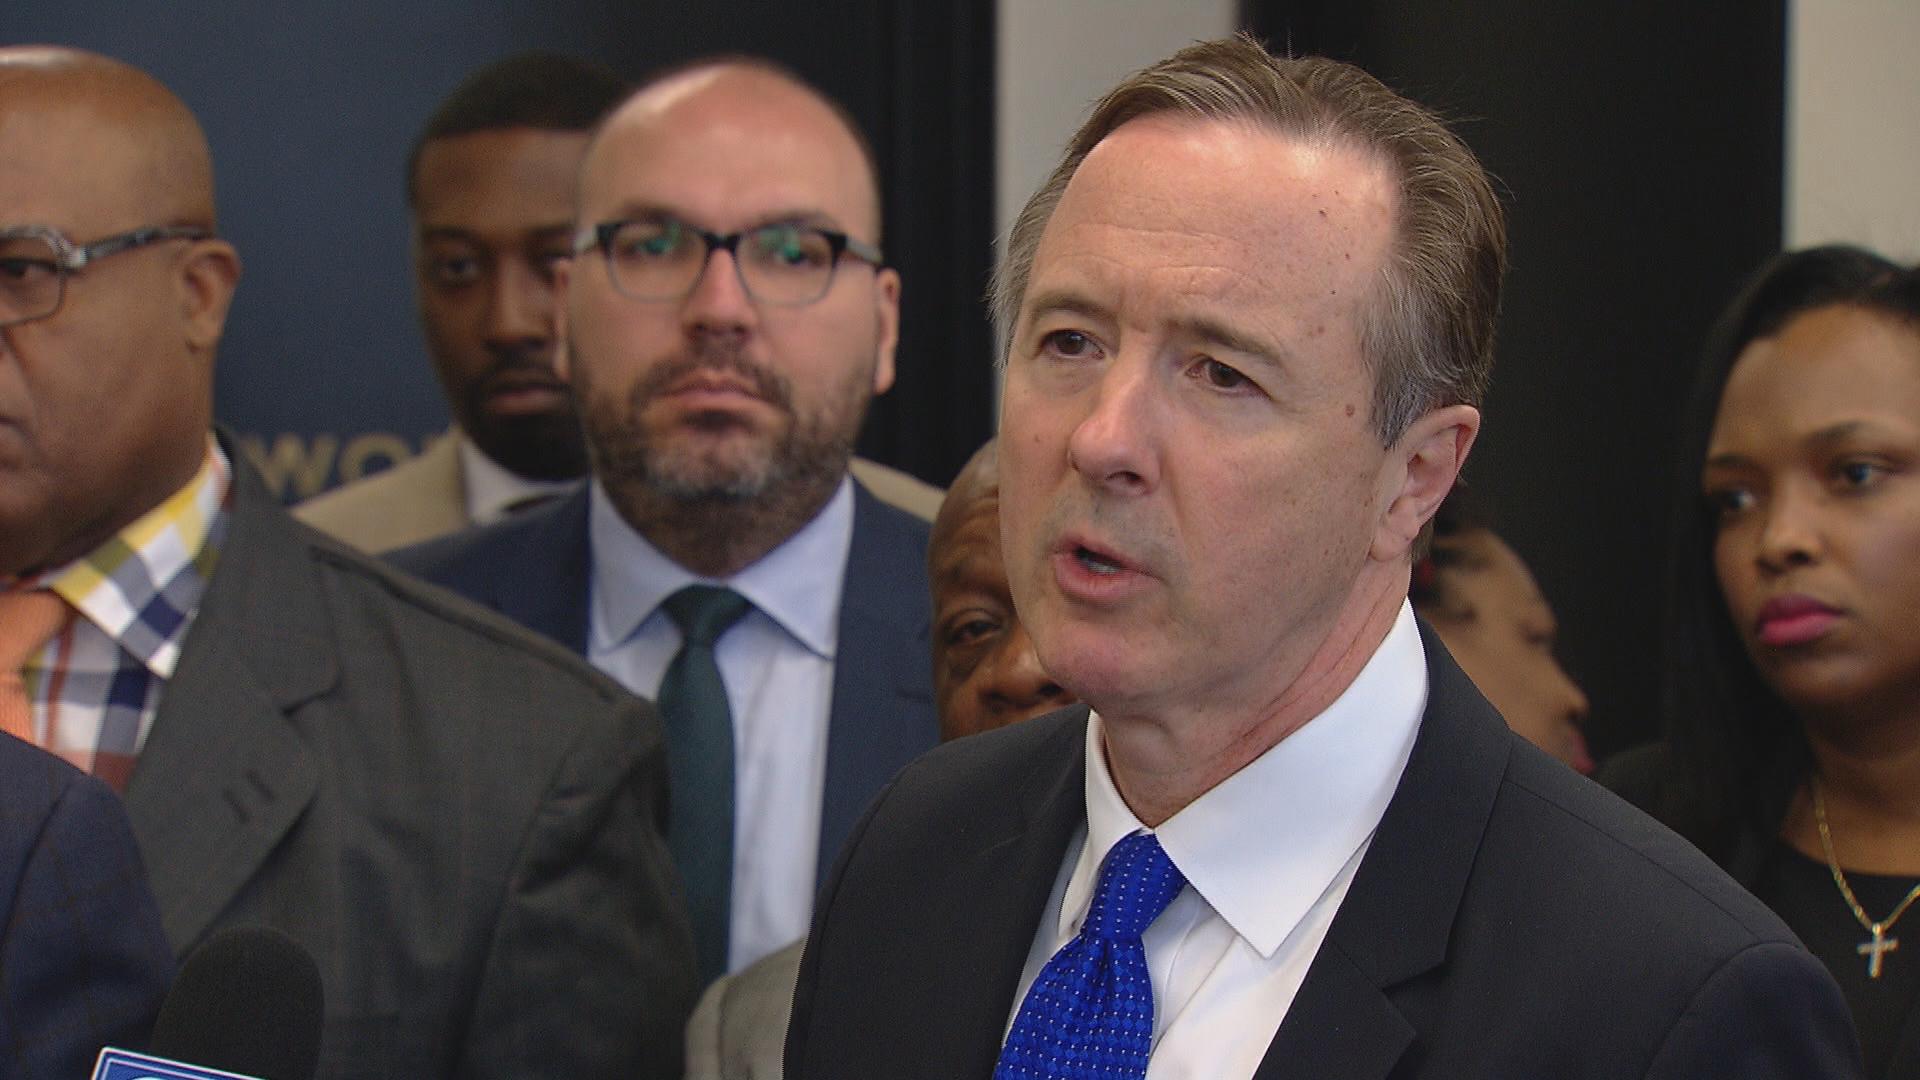 CPS CEO Forrest Claypool speaks to the media on April 19, 2017. (Chicago Tonight)